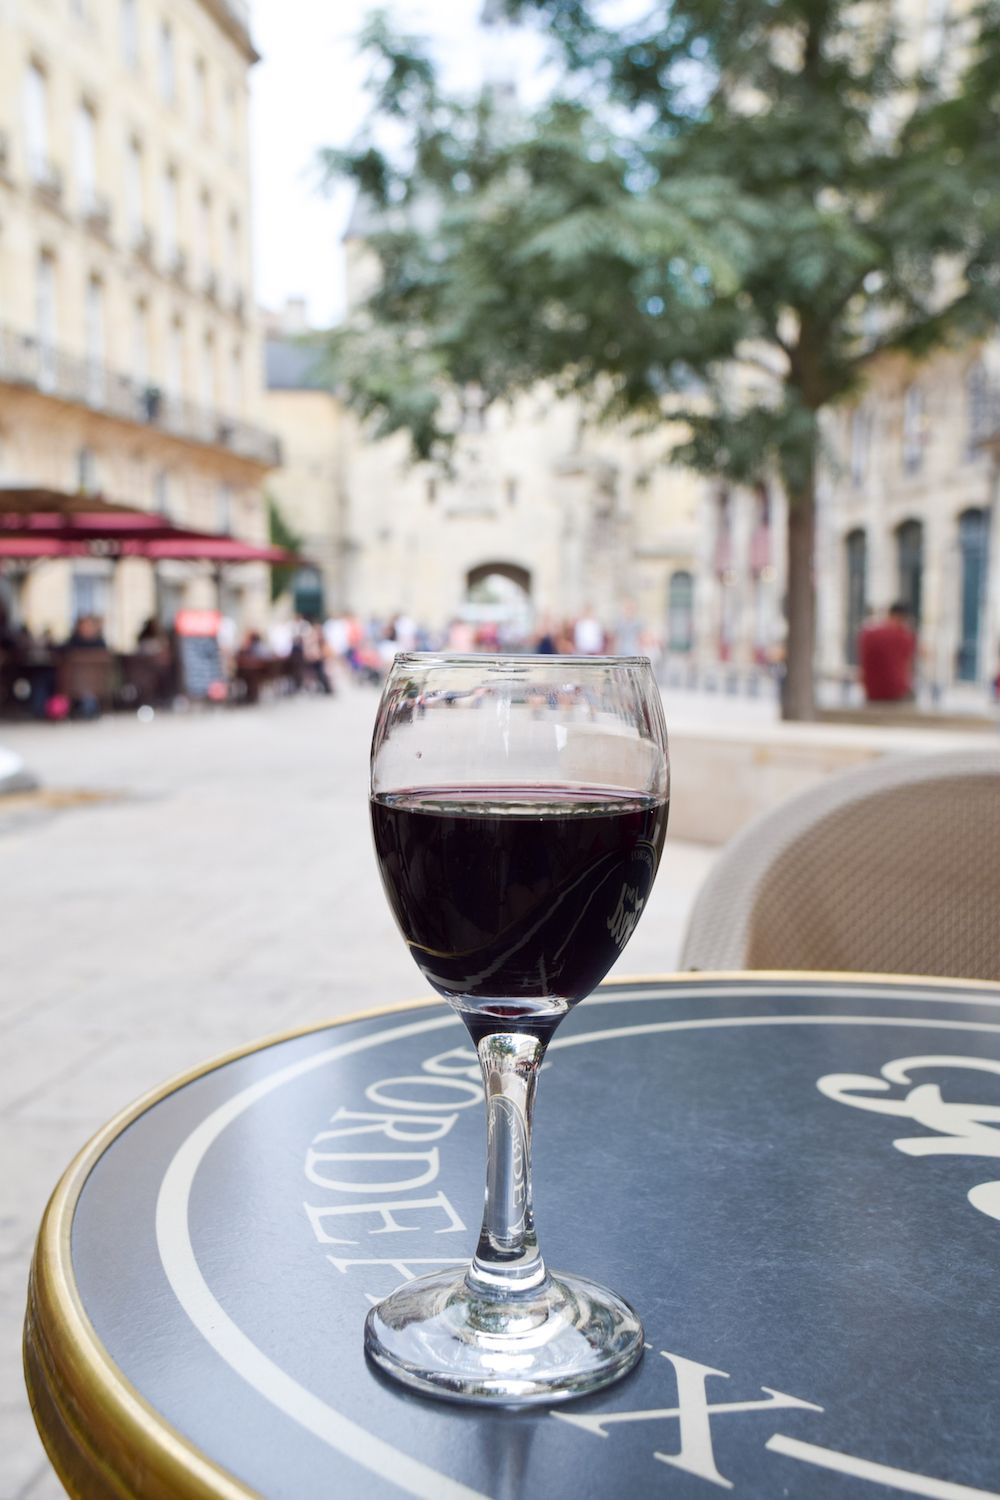 What to Do in Bordeaux: Drink Wine at Chez Fred Bordeaux